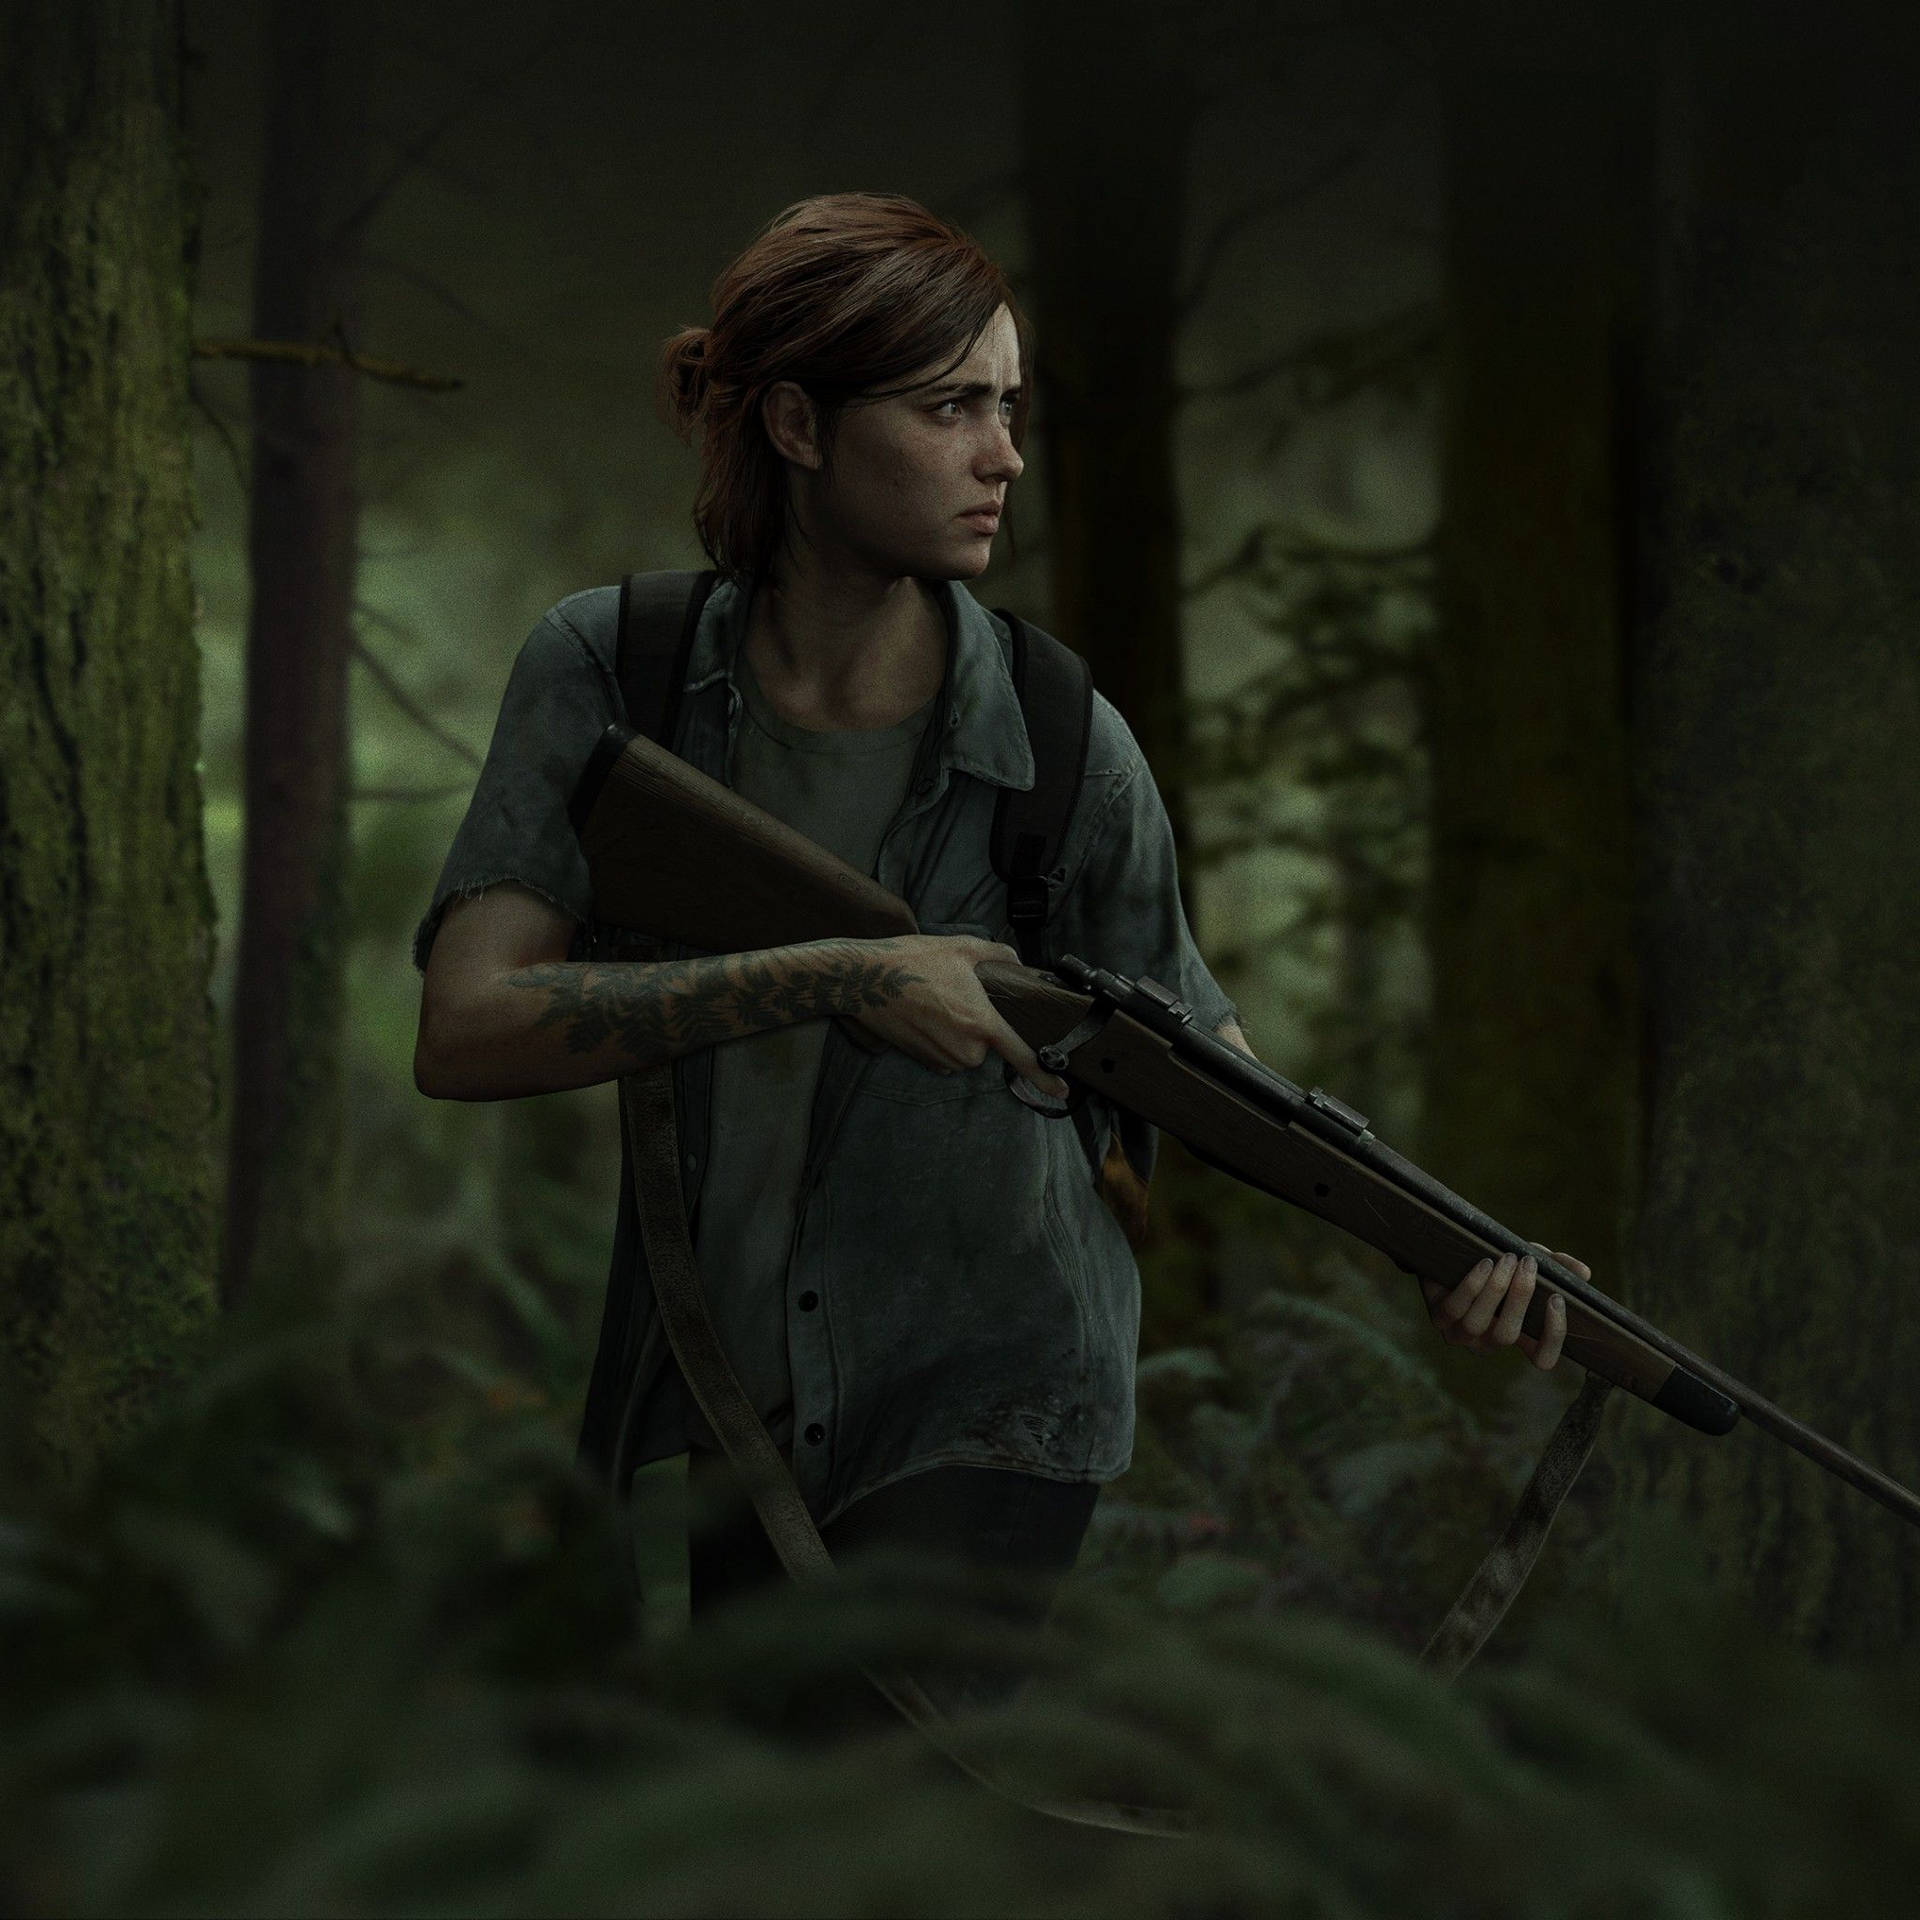 Ellie hunts to survive in the apocalyptic world of The Last Of Us Wallpaper